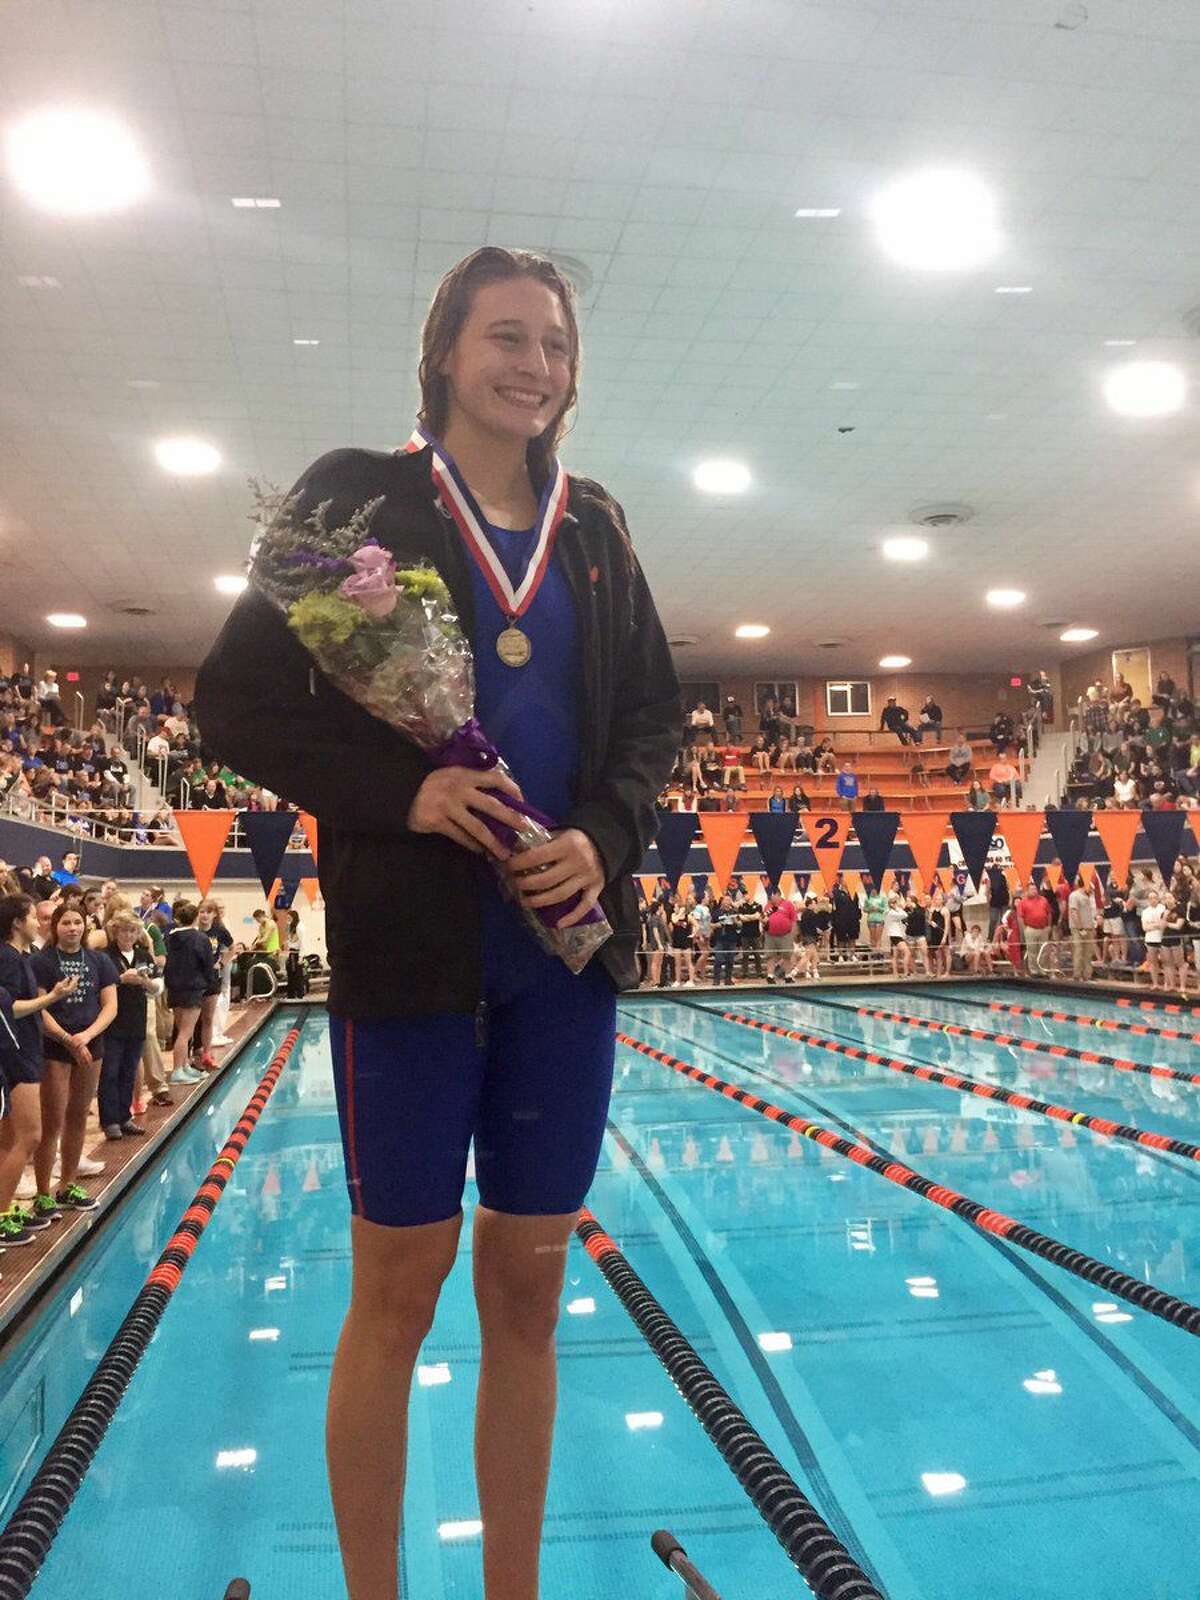 Edwardsville senior Bailey Grinter smiles on the medal stand on Saturday after winning the 100-yard backstroke at the state meet at Evanston High School.